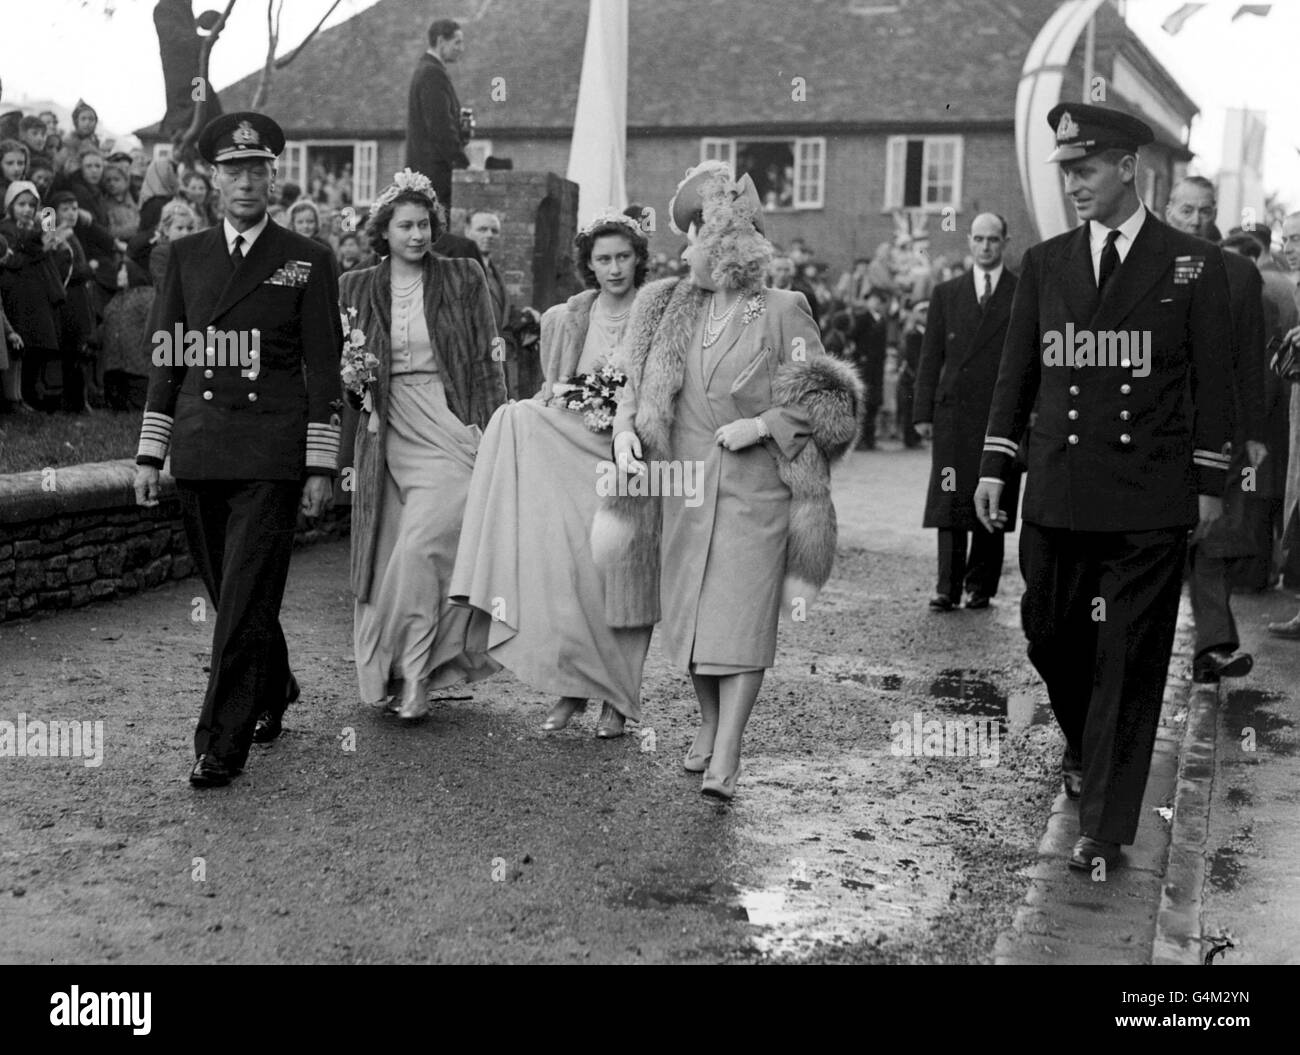 King George VI and Queen Elizabeth arrive at Romsey Abbey in the New Forest with bridesmaids Princesses Elizabeth and Margaret, for the wedding of Patricia Mountbatten (the daughter of Viscount Mountbatten) and Lord Brabourne. Philip Mountbatten (of Greece) can be seen, right. Princess Alexandra of Kent was also a bridesmaid. Stock Photo